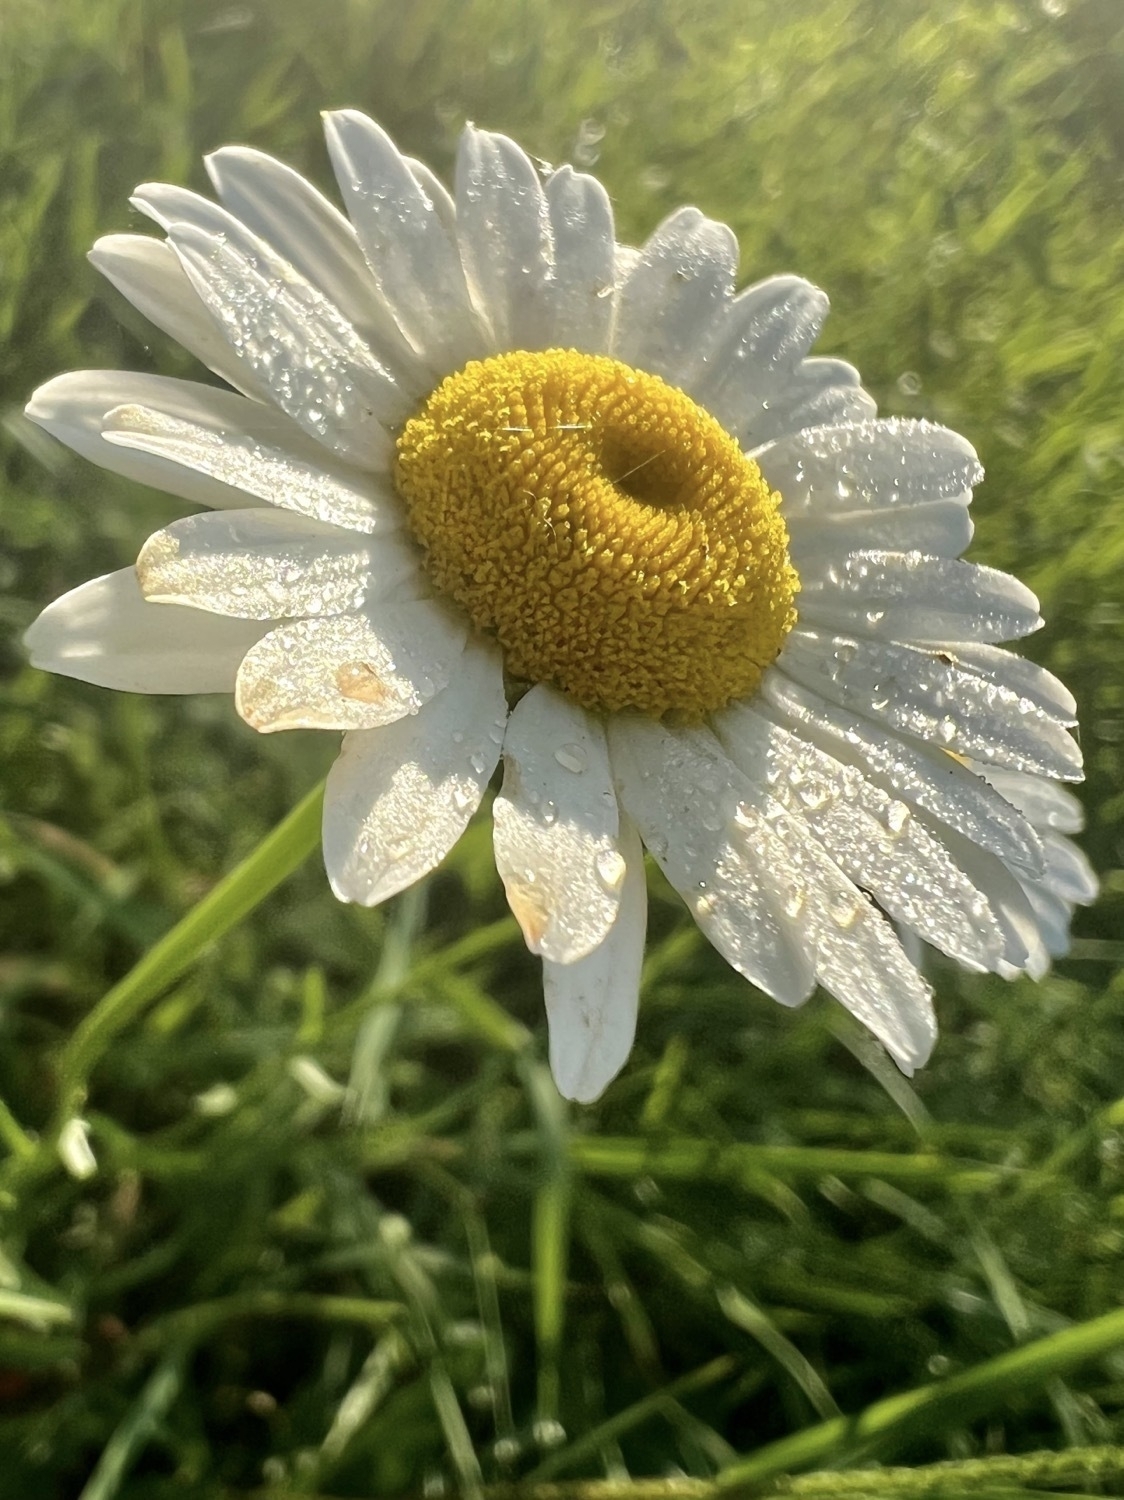 A close-up image morning dew drops on a white daisy with yellow center. Grass can be seen in the background.